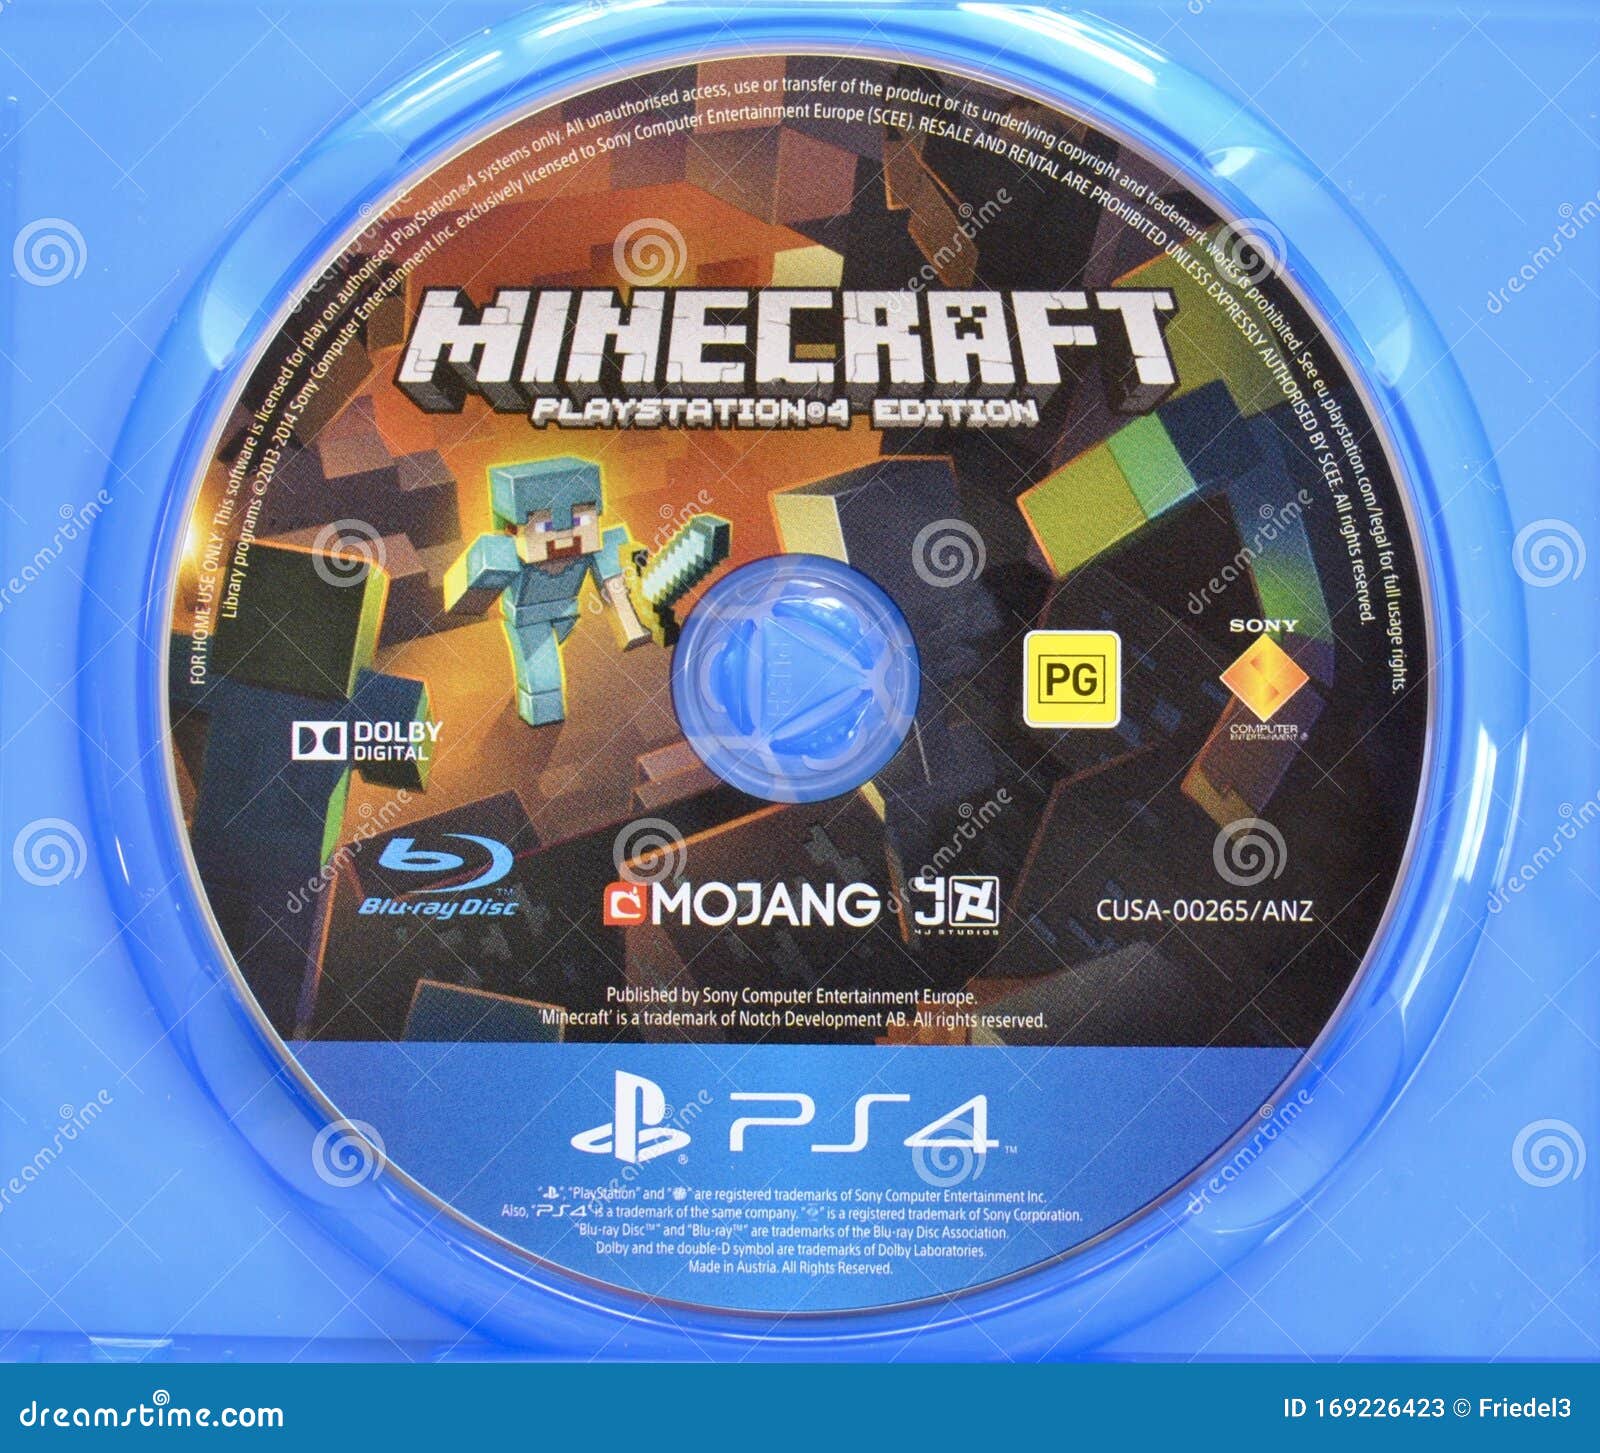 Minecraft (PlayStation 4) PS4 Edition - DISC ONLY 